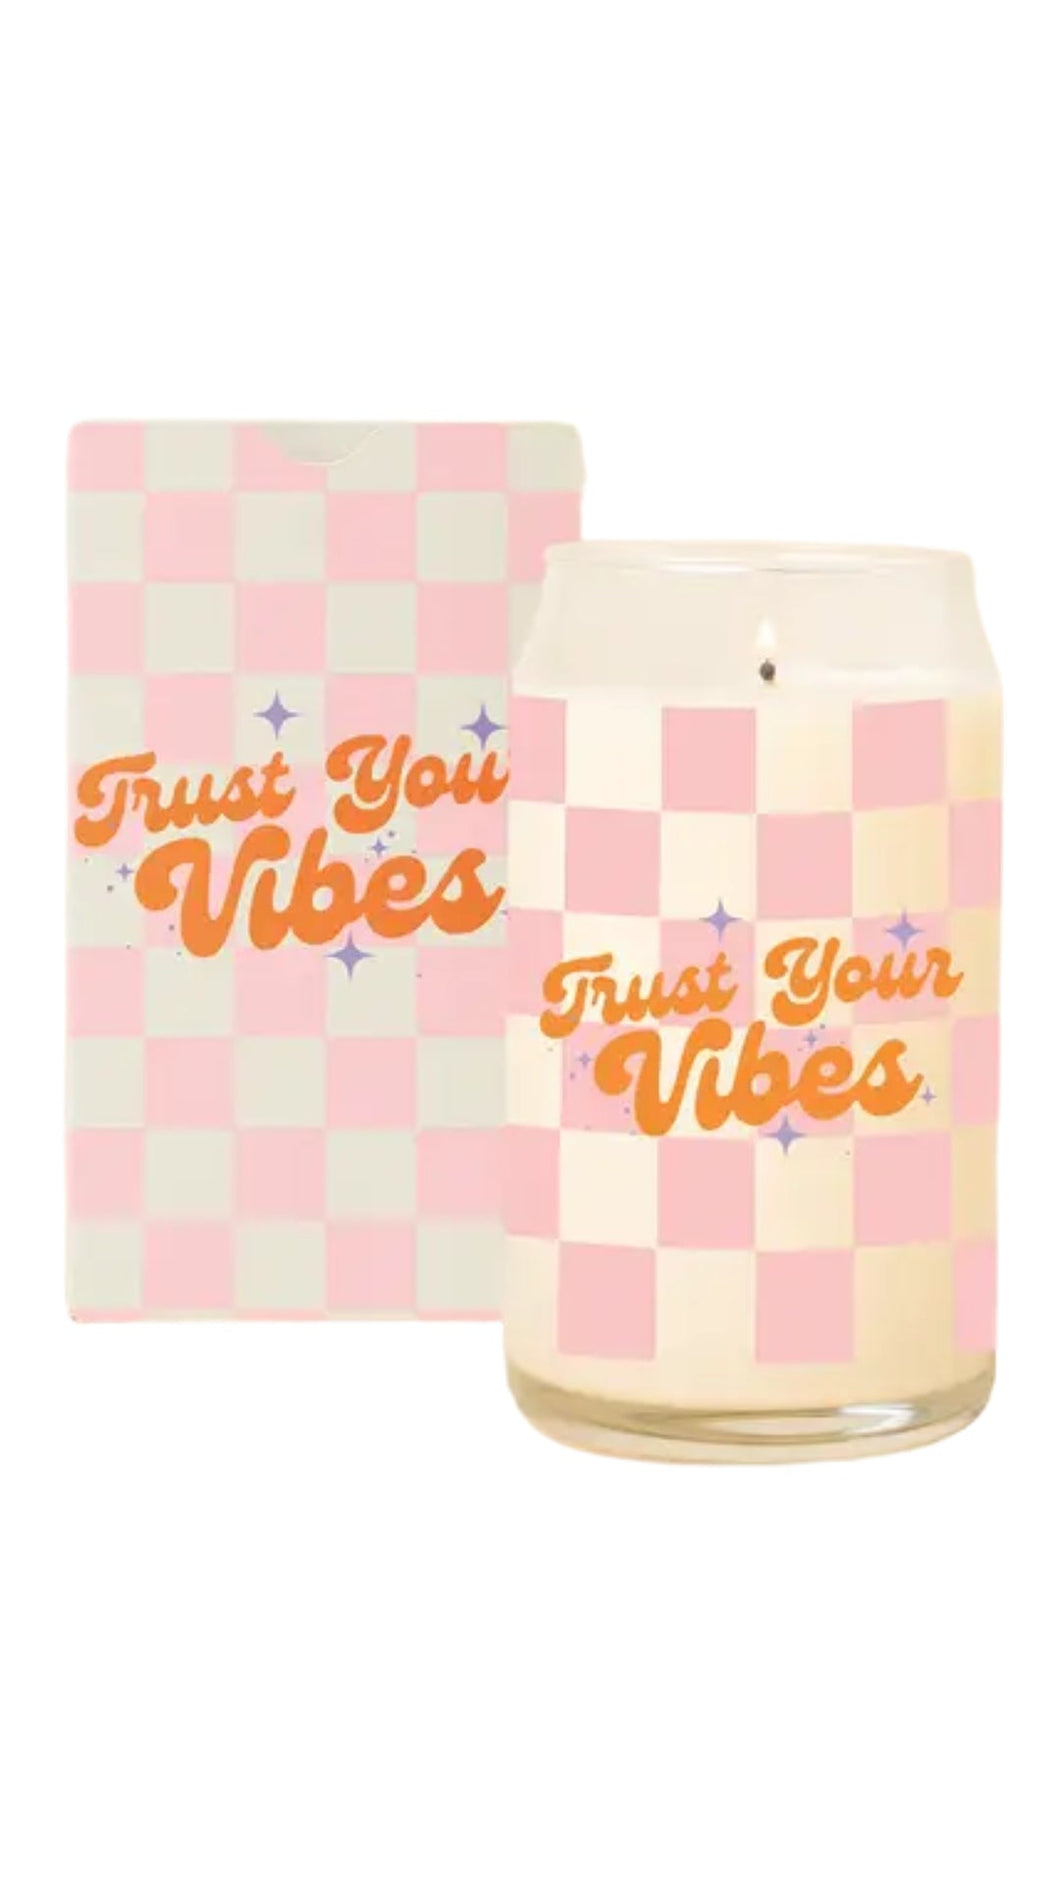 Trust Your Vibes Candle Can Glass